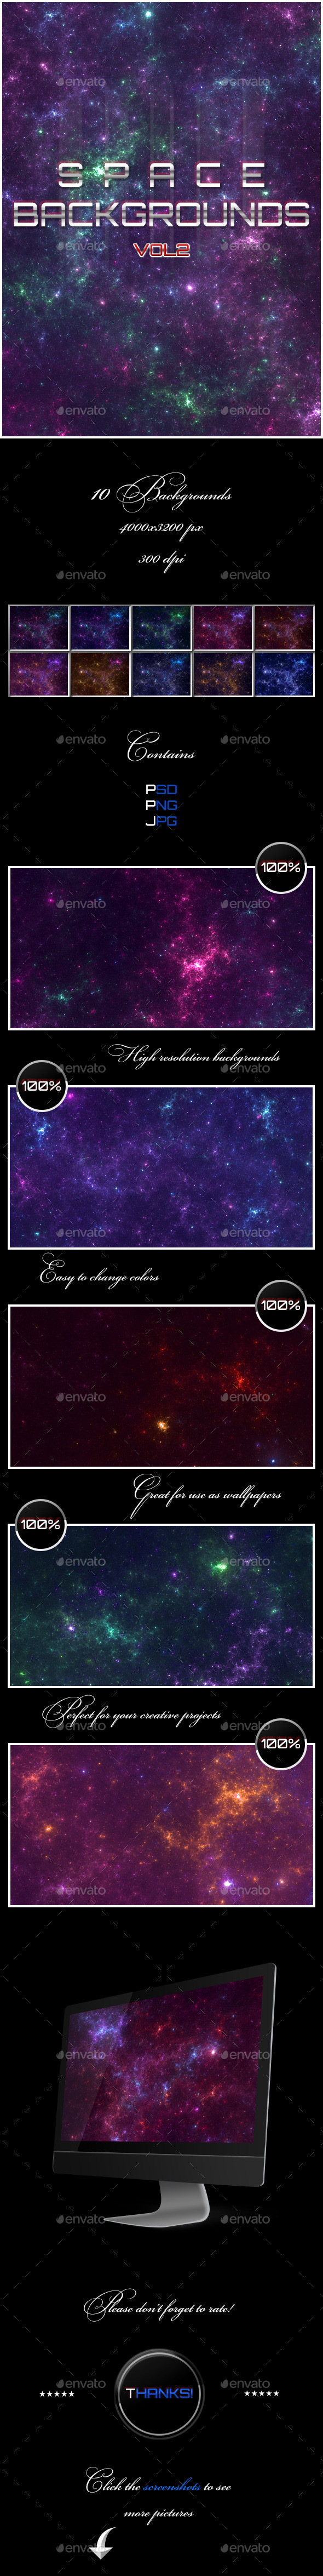 Space backgrounds vol2   preview2